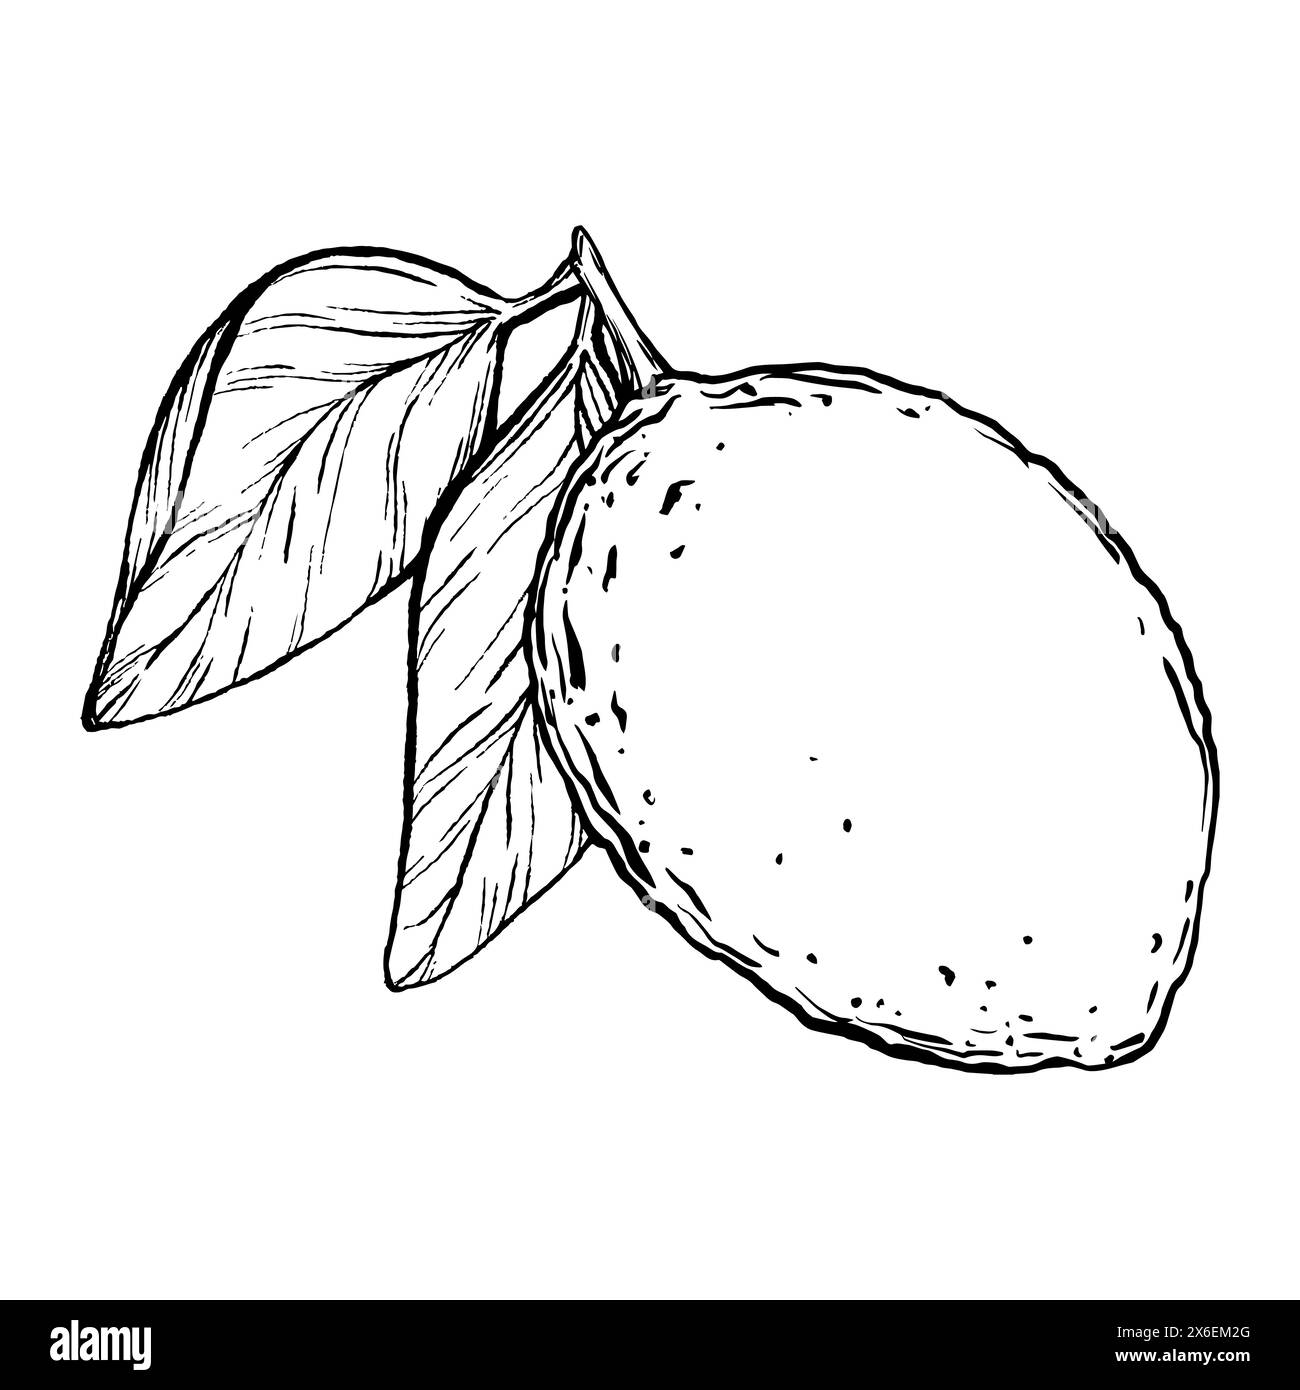 Vector juicy Lemon. Exotic plants design template. Graphic botanical illustration Citrus fruit in line art style, sketch, chalkboard style. Isolated o Stock Vector